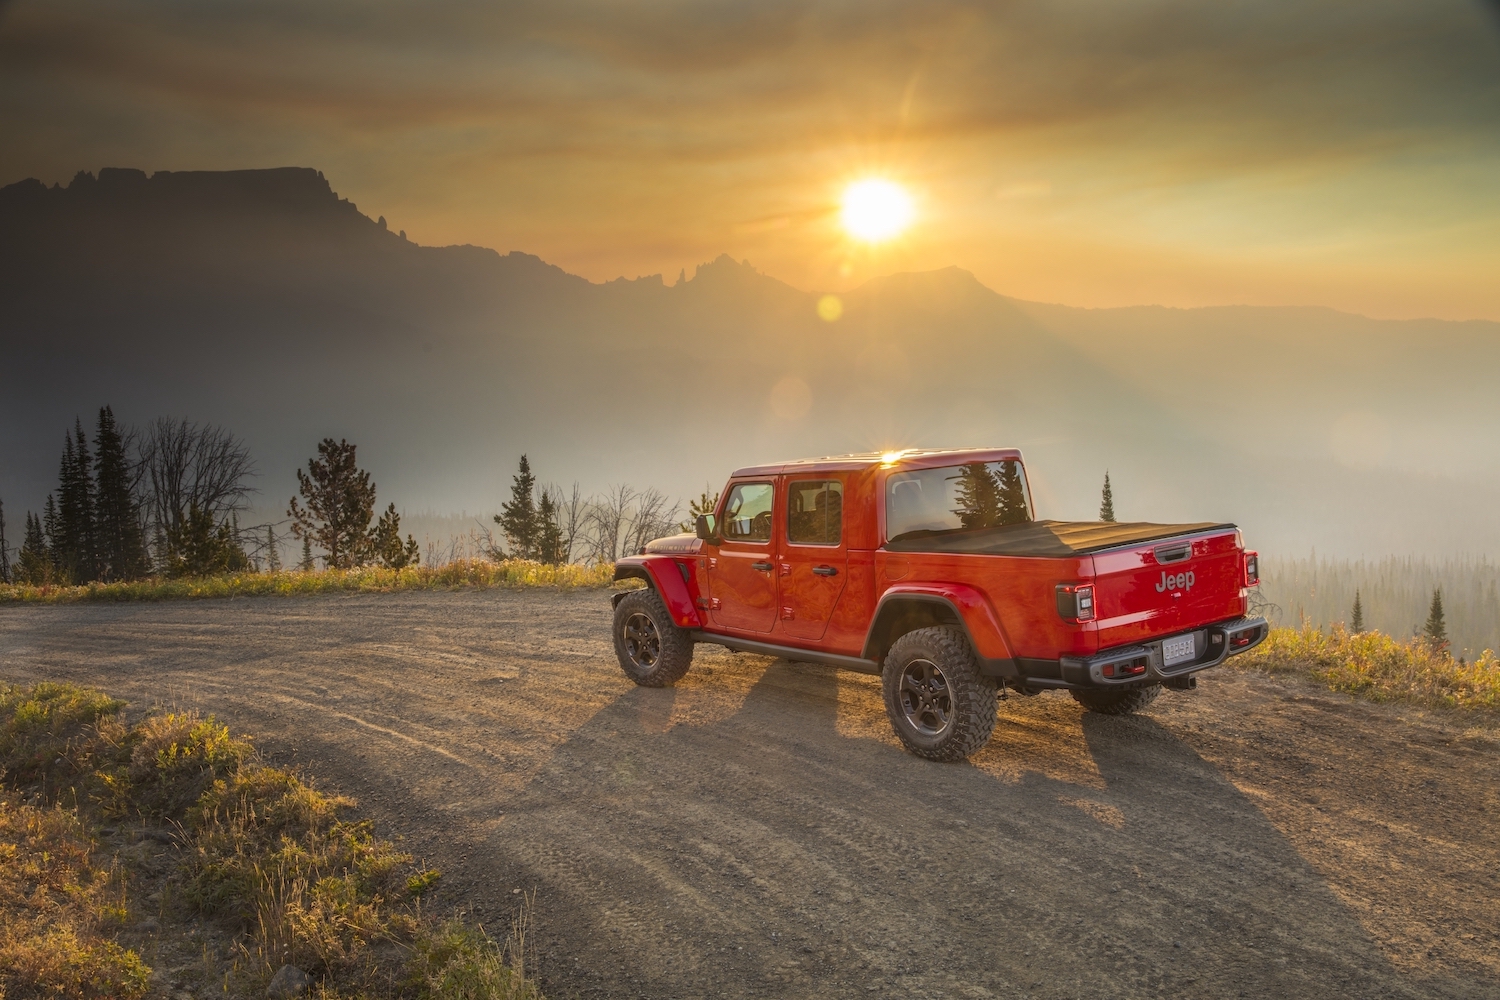 Promotional photo of a red 4WD Jeep Gladiator truck cruising down a dirt road with the sun setting behind a mountain range visible in the background.